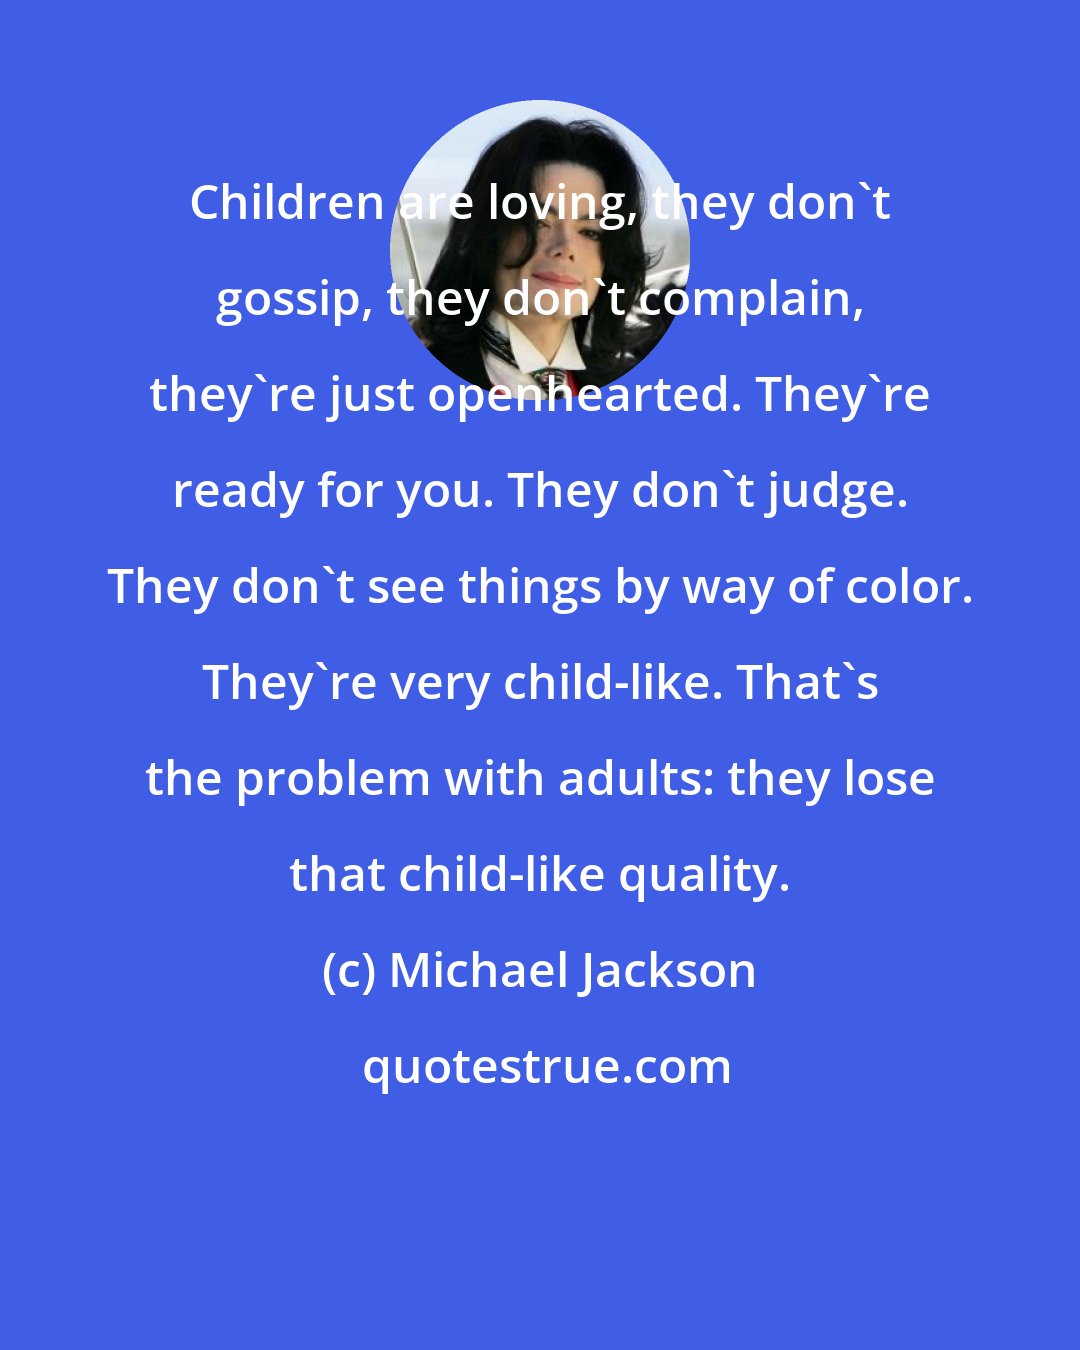 Michael Jackson: Children are loving, they don't gossip, they don't complain, they're just openhearted. They're ready for you. They don't judge. They don't see things by way of color. They're very child-like. That's the problem with adults: they lose that child-like quality.